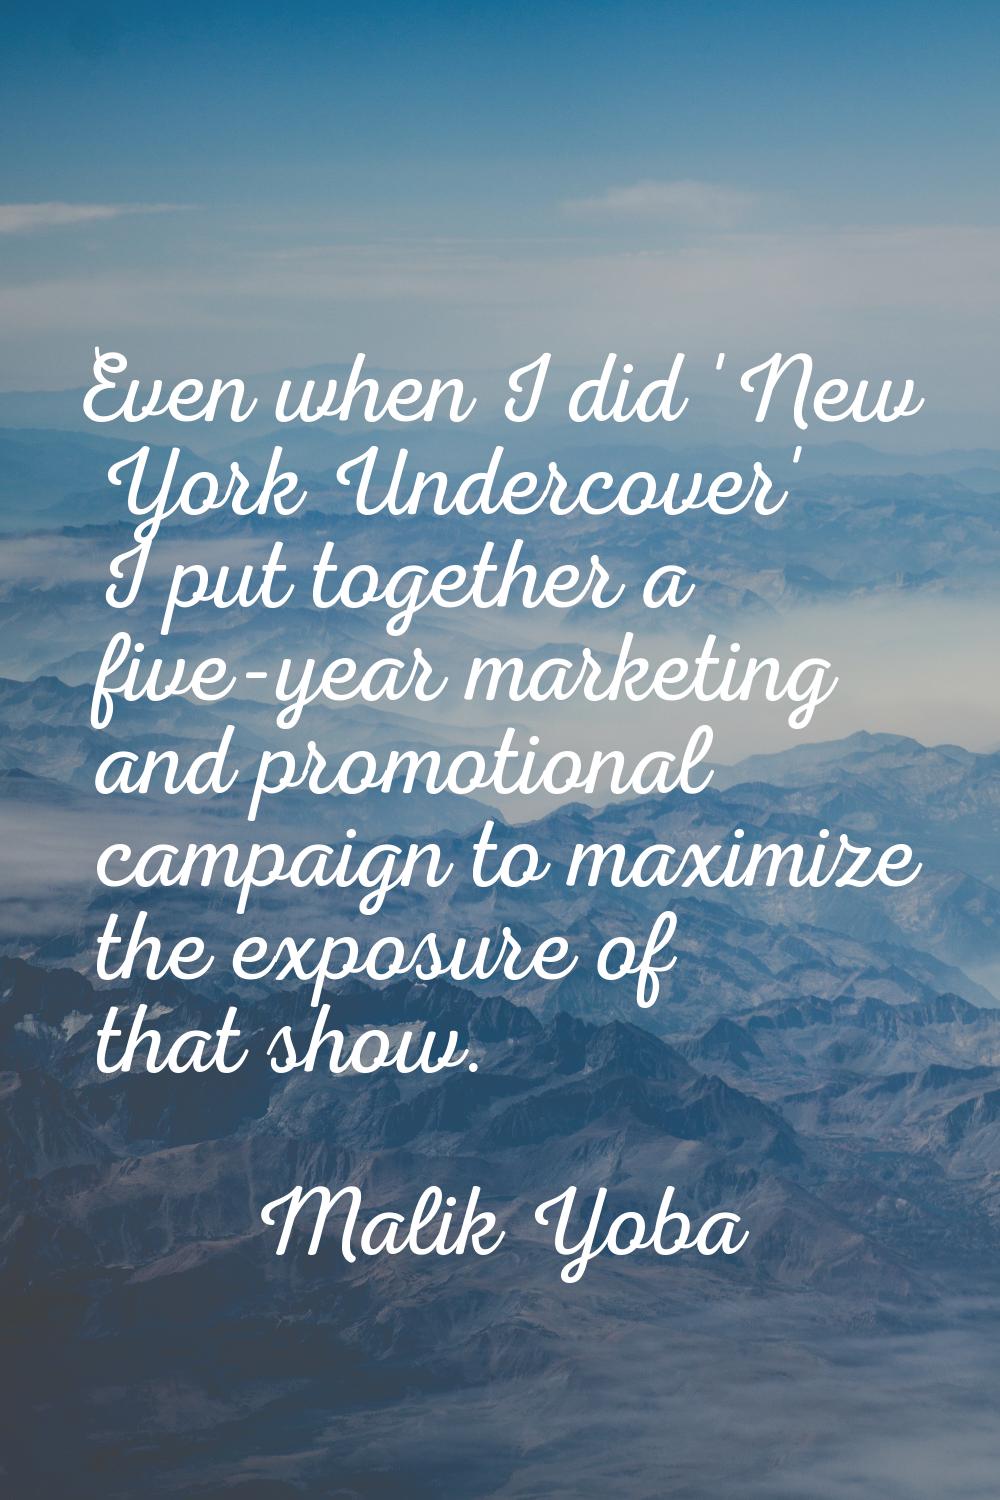 Even when I did 'New York Undercover' I put together a five-year marketing and promotional campaign